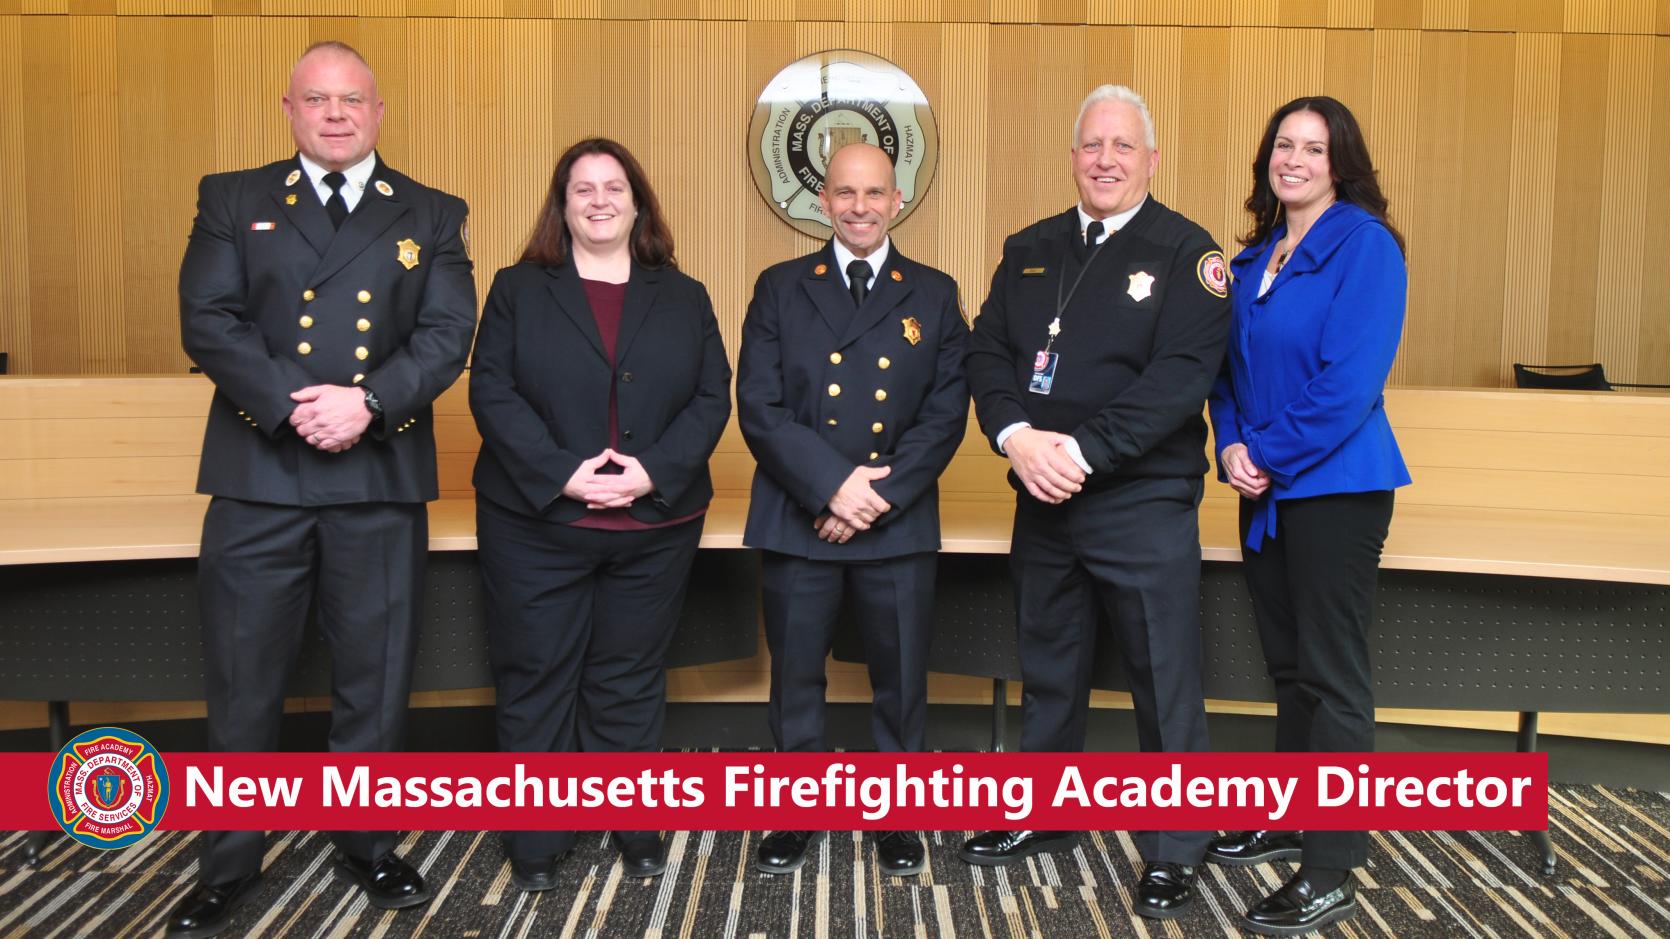 Photo of the State Fire Marshal, Deputy Marshal, and three leaders of the Massachusetts Firefighting Academy